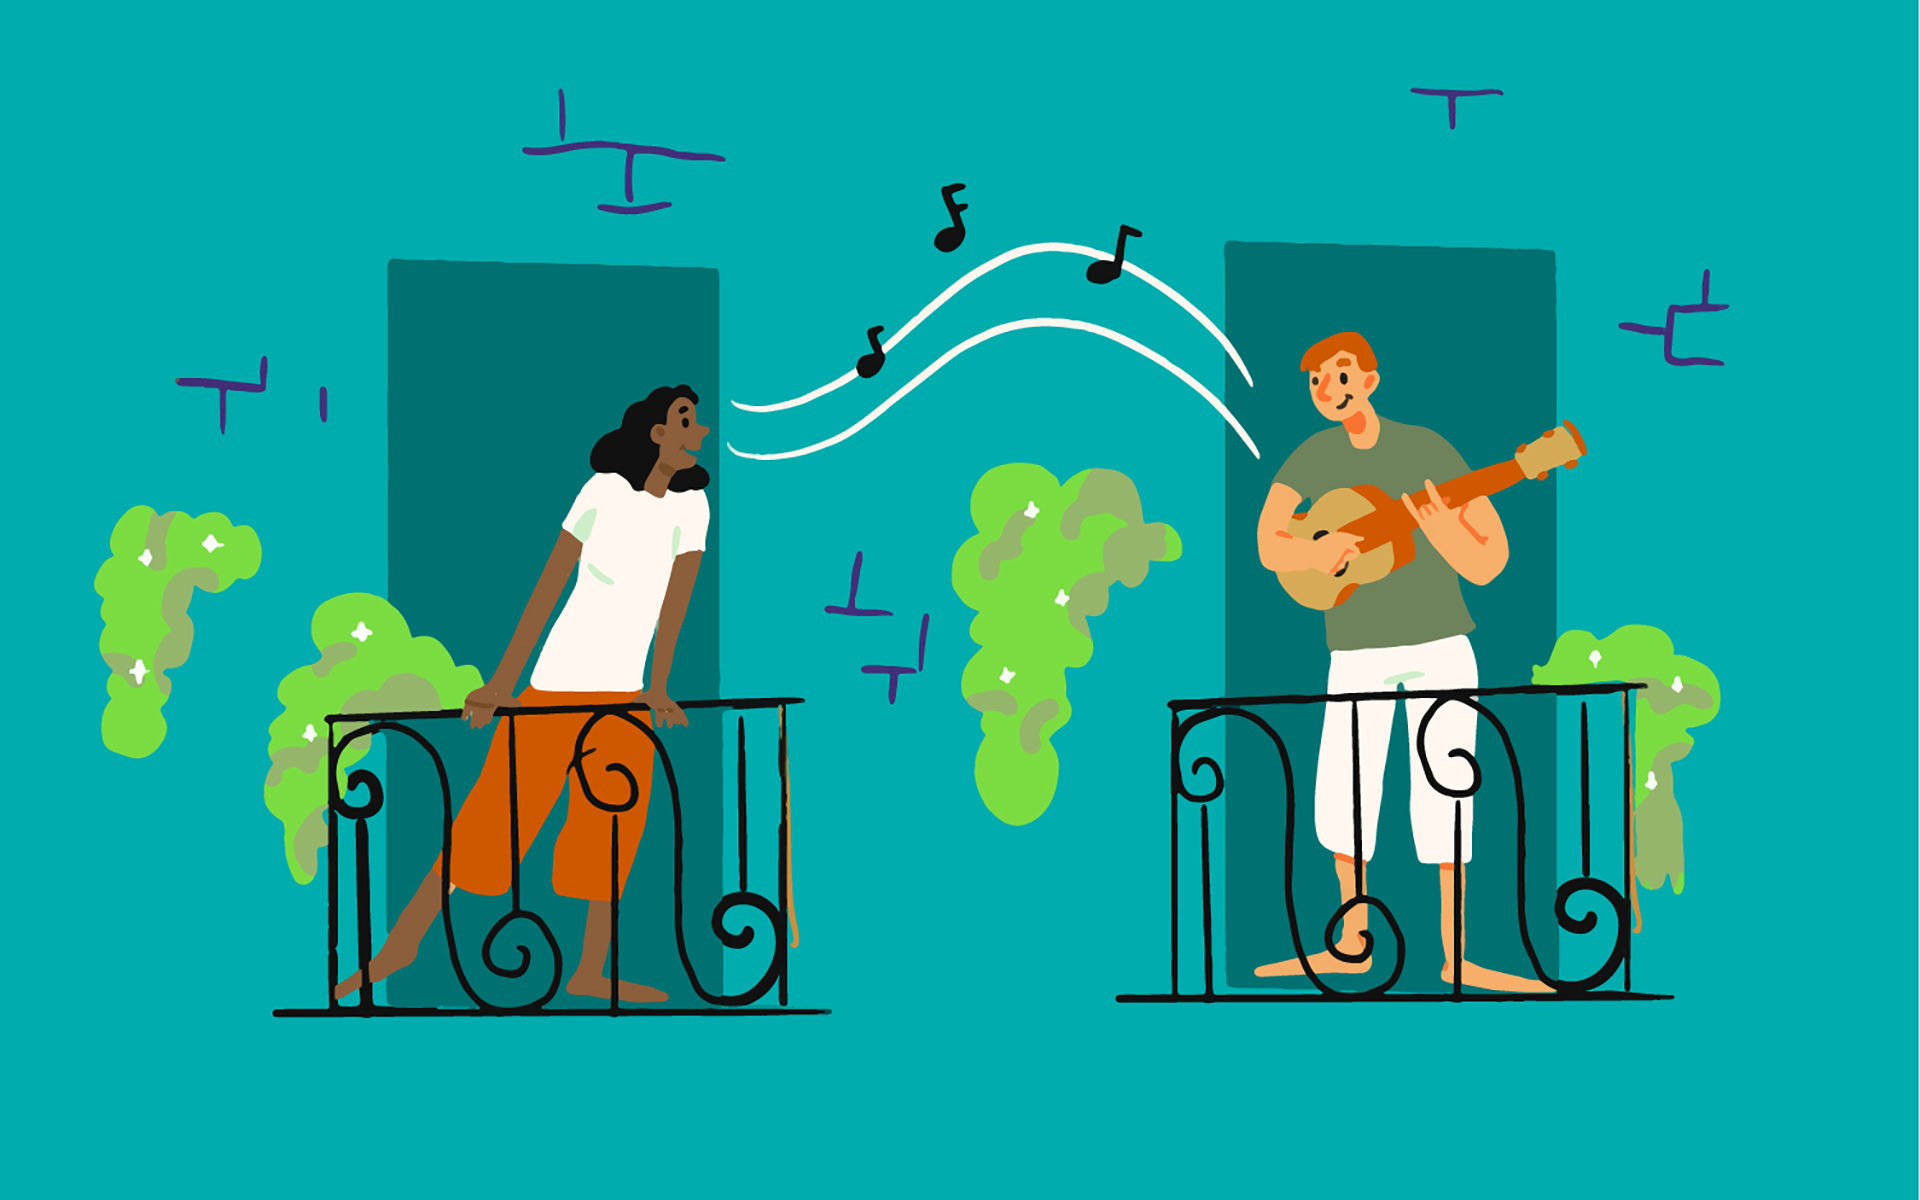 Illustration of two people standing on their separate balconies that are on a teal building. The person on the left is Black and singing while the person on the right is white and playing a guitar.